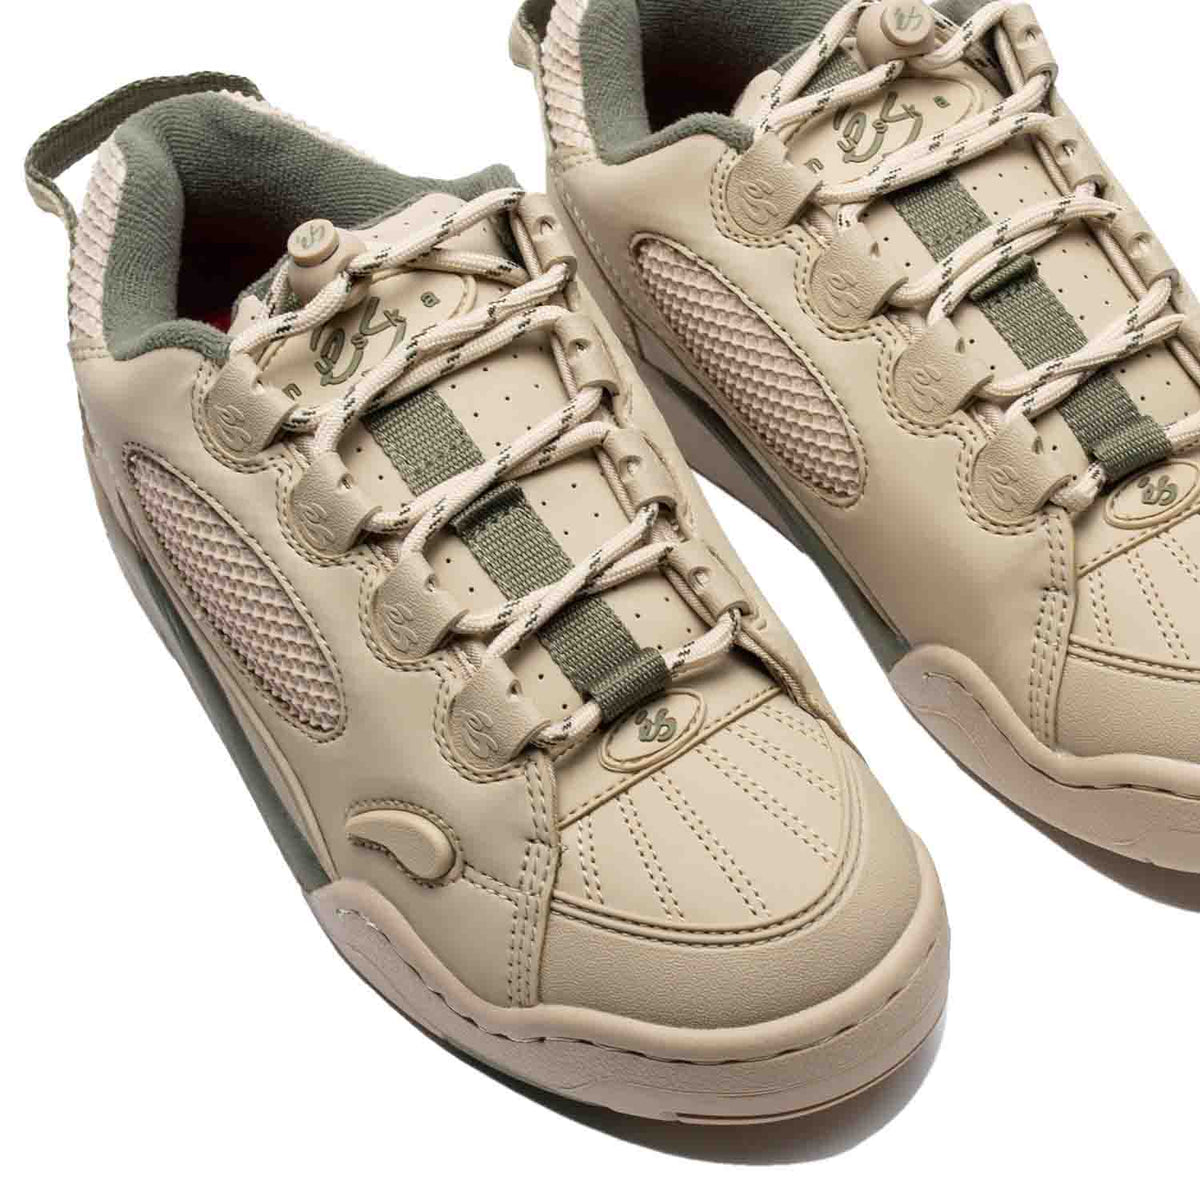 The Es Muska in tan and green, endorsed by Chad Muska, is the pinnacle of skateboarding footwear. Its PU cage and heel mesh offer durability, while the rubber toe cap and lace protection ensure longevity. Features like the hidden stash pocket, heel pull tab, and reflective logo on the heel add convenience and style. With a molded EVA footbed and 400 NBS rubber cupsole, it provides comfort and grip, ideal for skaters of all levels.